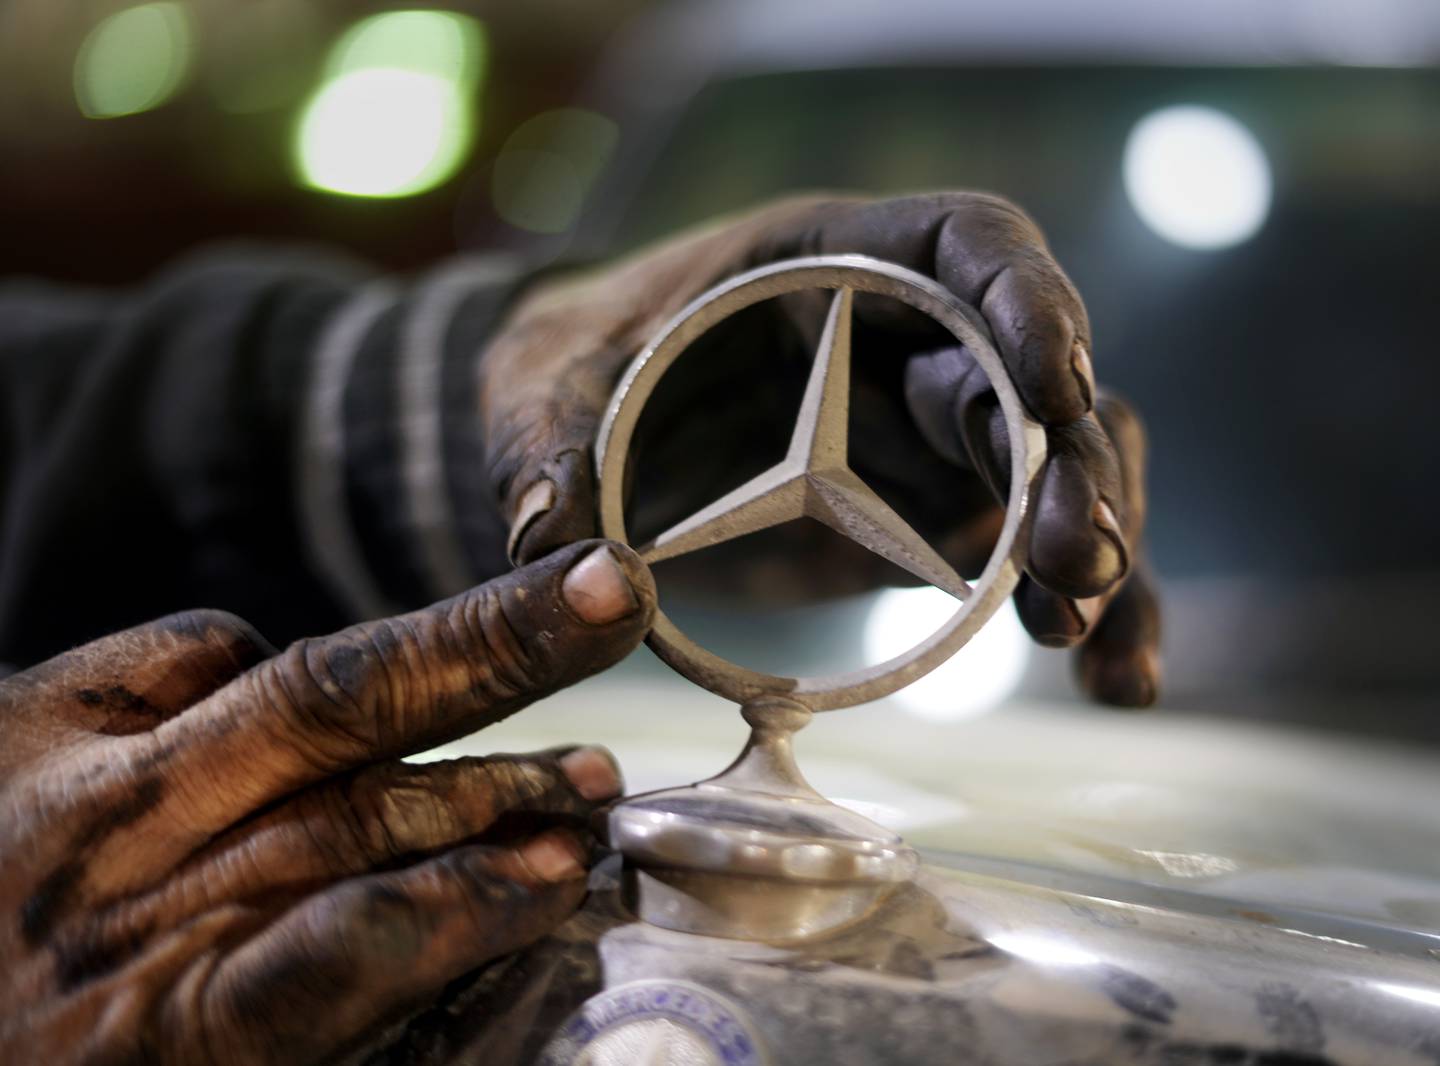 A mechanic replaces the bonnet ornament on a 1976 Mercedes at a private collector's lot in El Saff city outside Cairo, Egypt. AP Photo